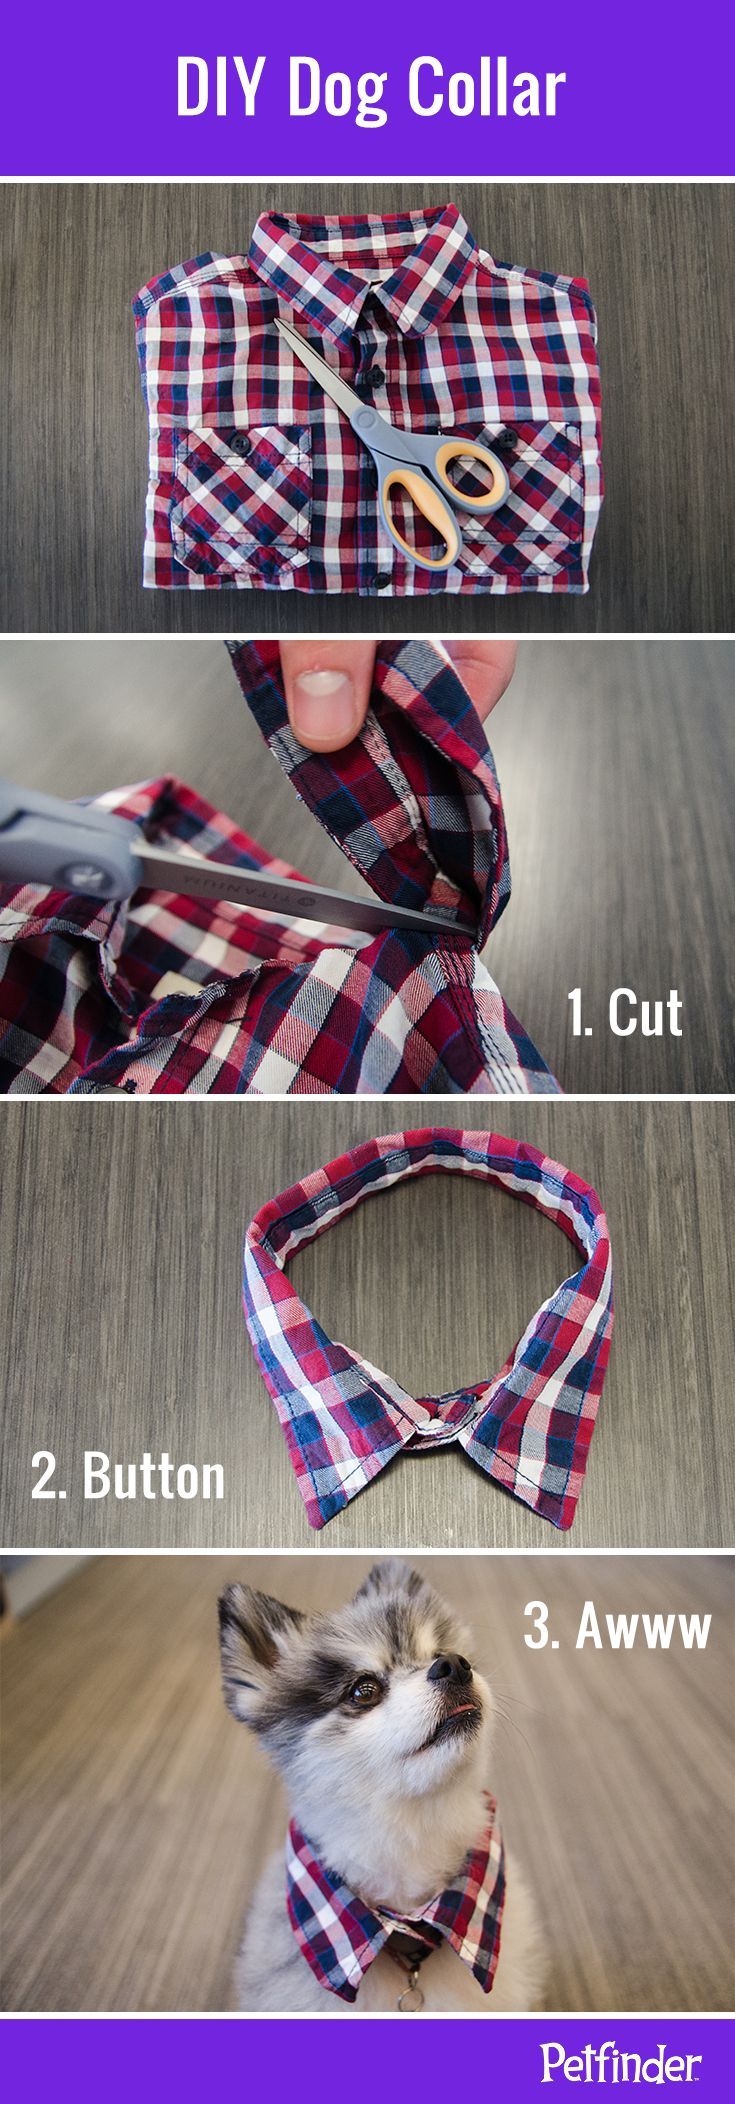 Fun DIY dog collar idea: trim the collar off a child-sized button-down shirt to make a cute collar for your pup. Its a great way